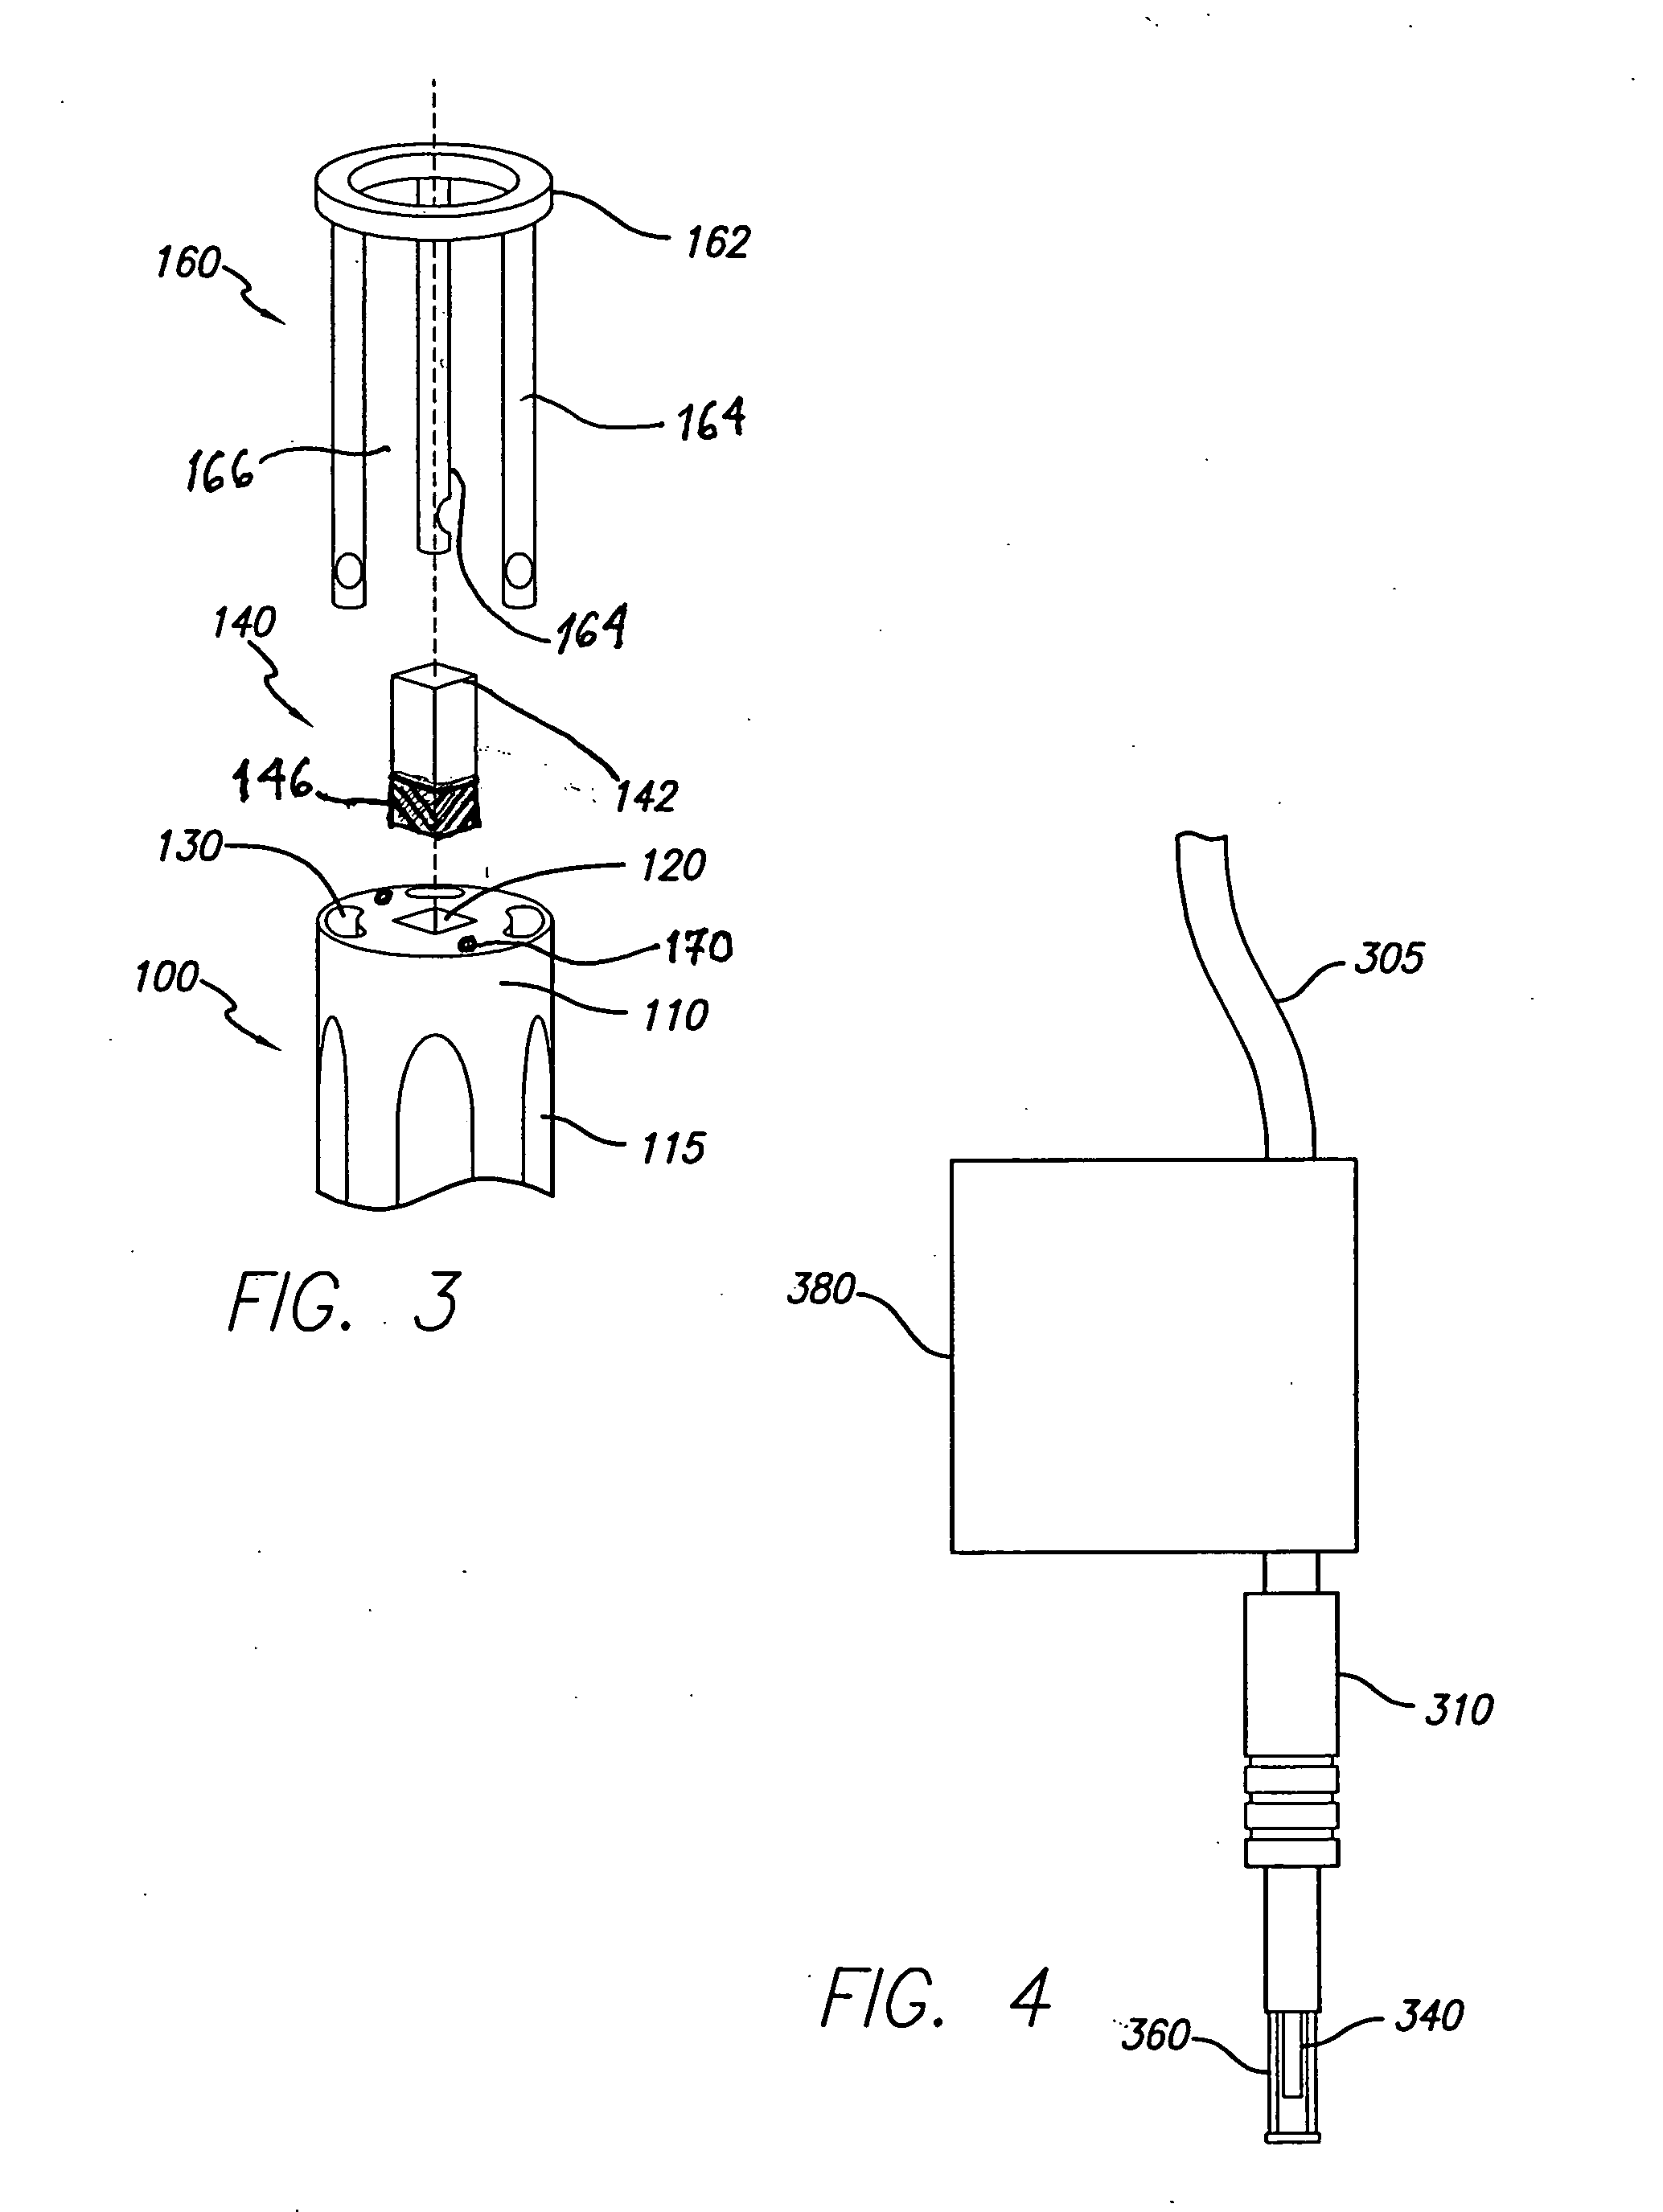 Apparatus and method for using intense pulsed light to non-invasively treat conjunctival blood vessels, pigmented lesions, and other problems of the eye and eyelid